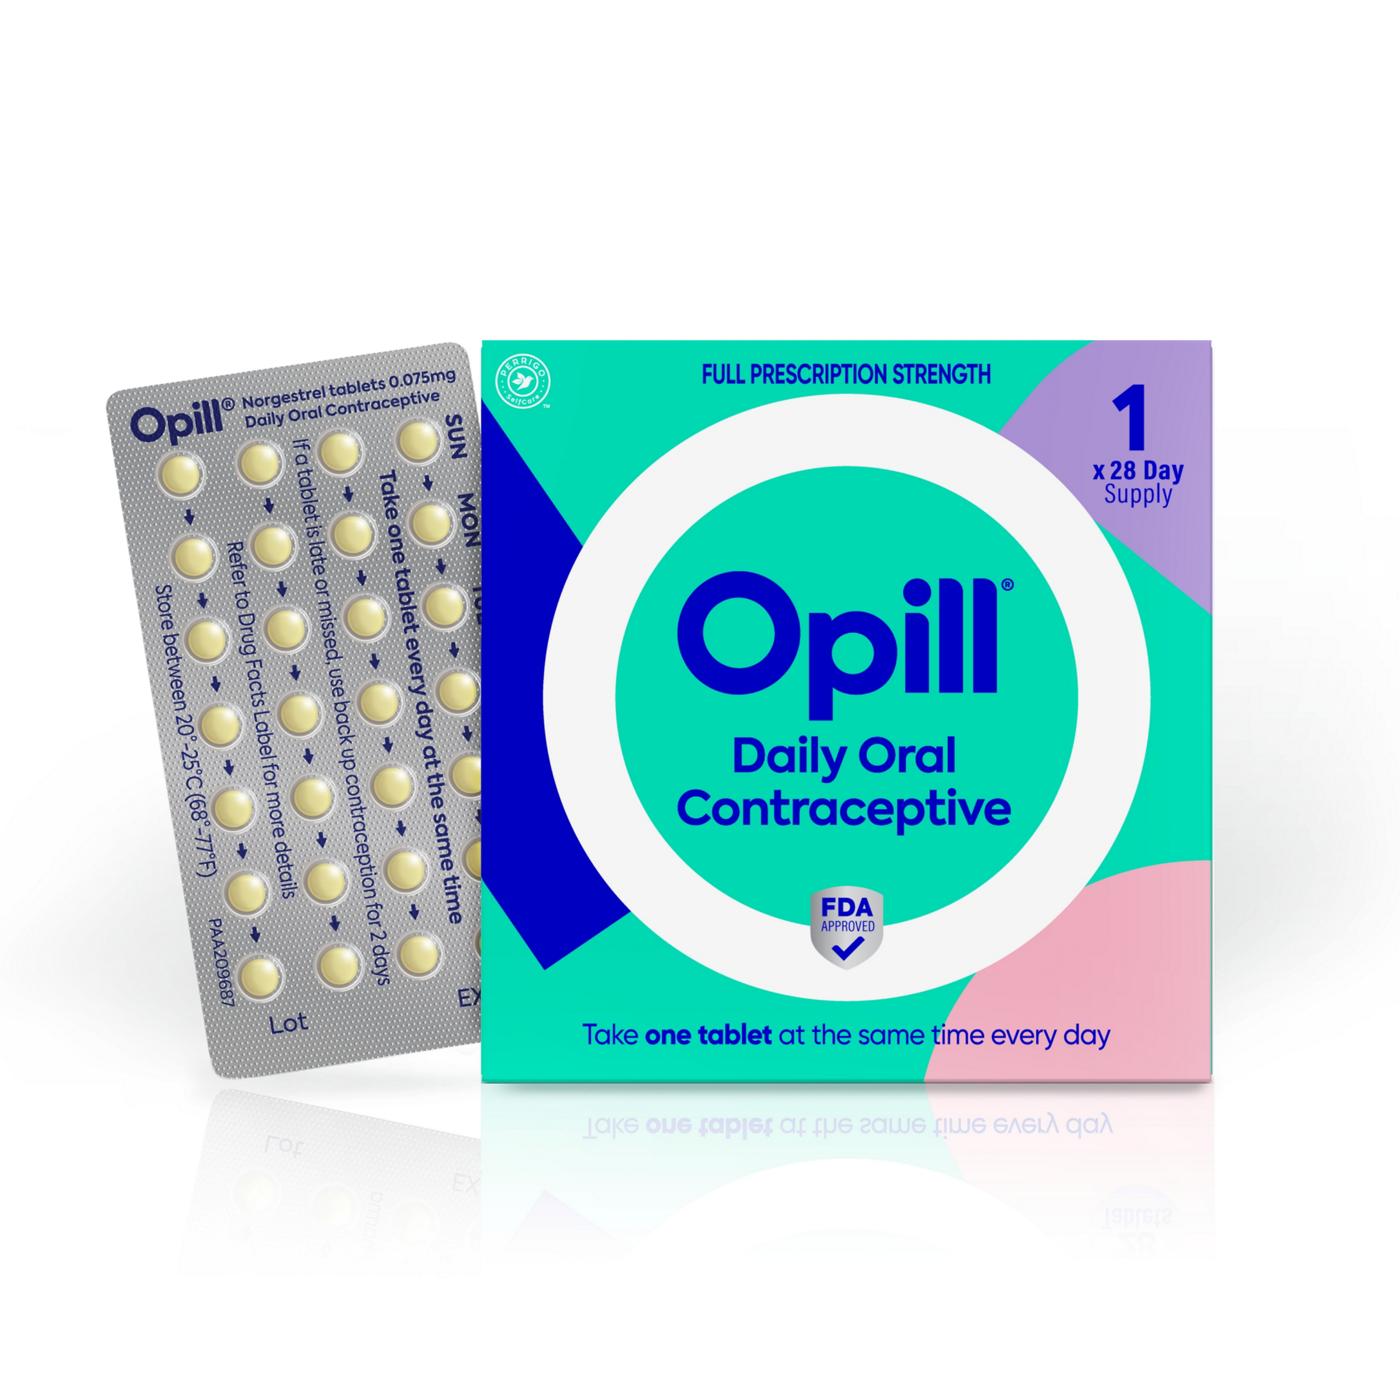 Opill Daily Oral Contraceptive Norgestrel Tablets - 0.075 mg; image 7 of 11